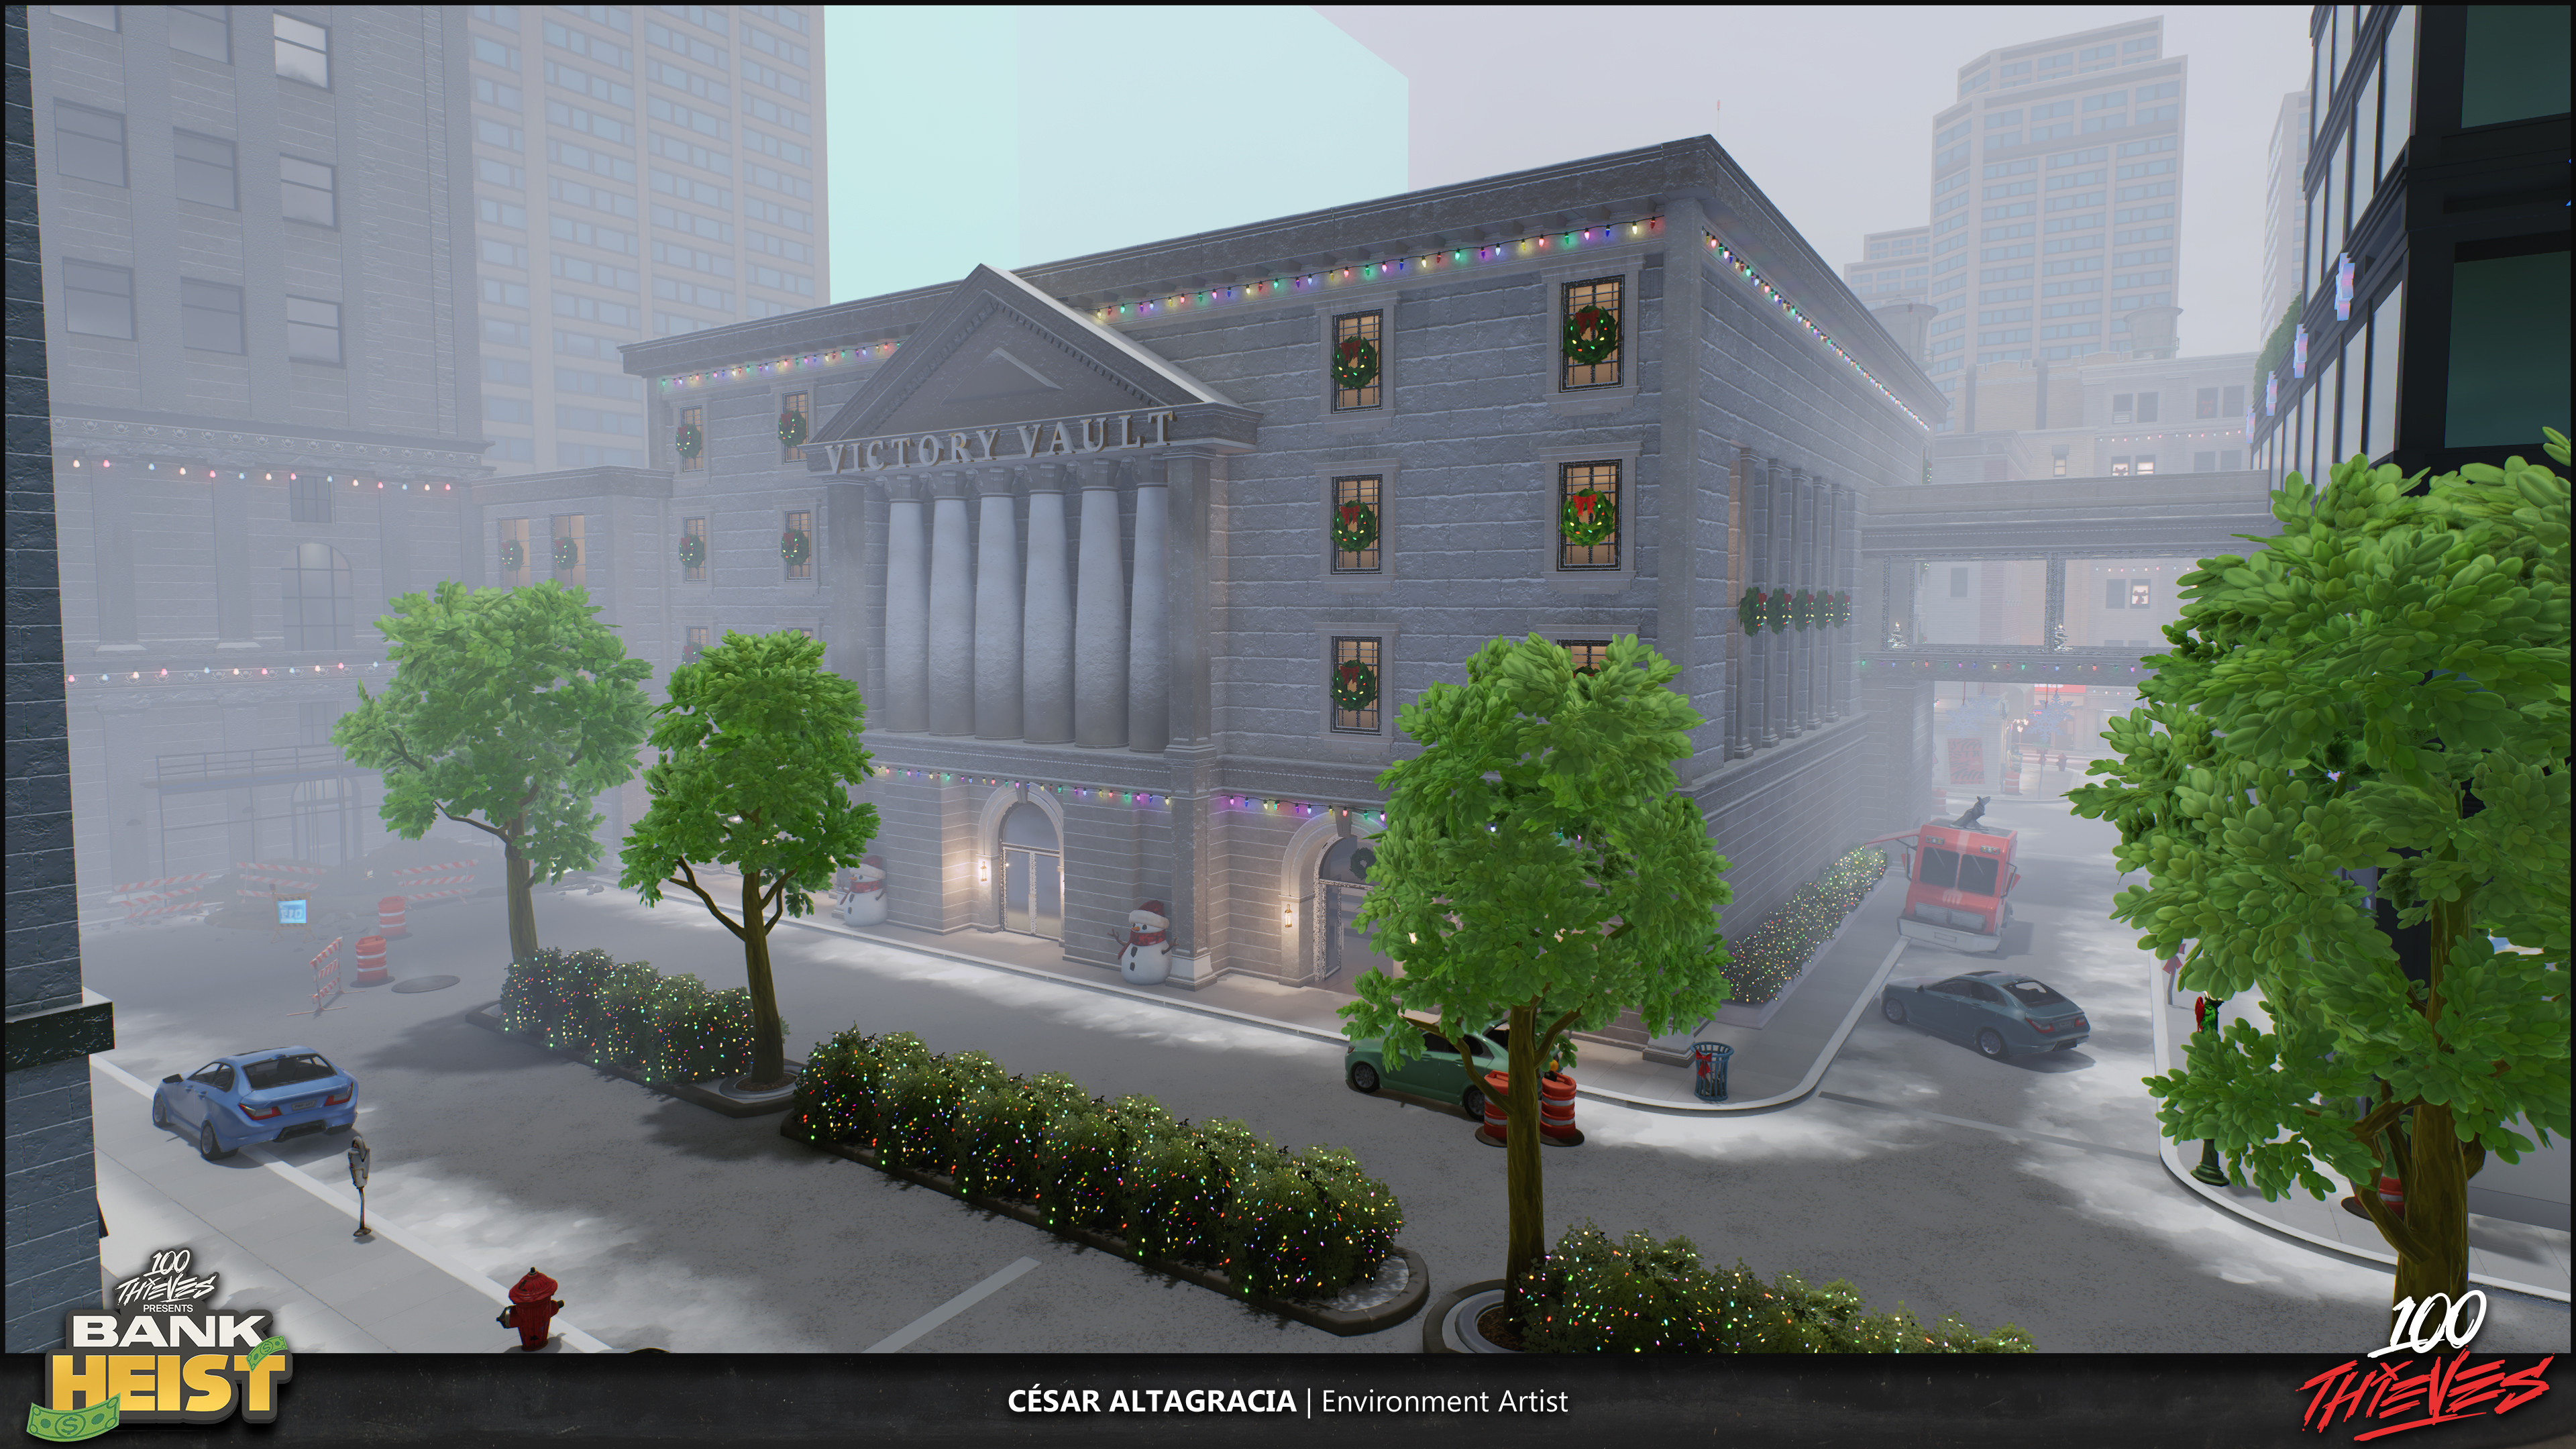 Bank Heist Holiday update.
For the winter season I placed holiday decorations across the entire map. 
Weather effects, lighting and snow texture updates by Thiago Klafke.